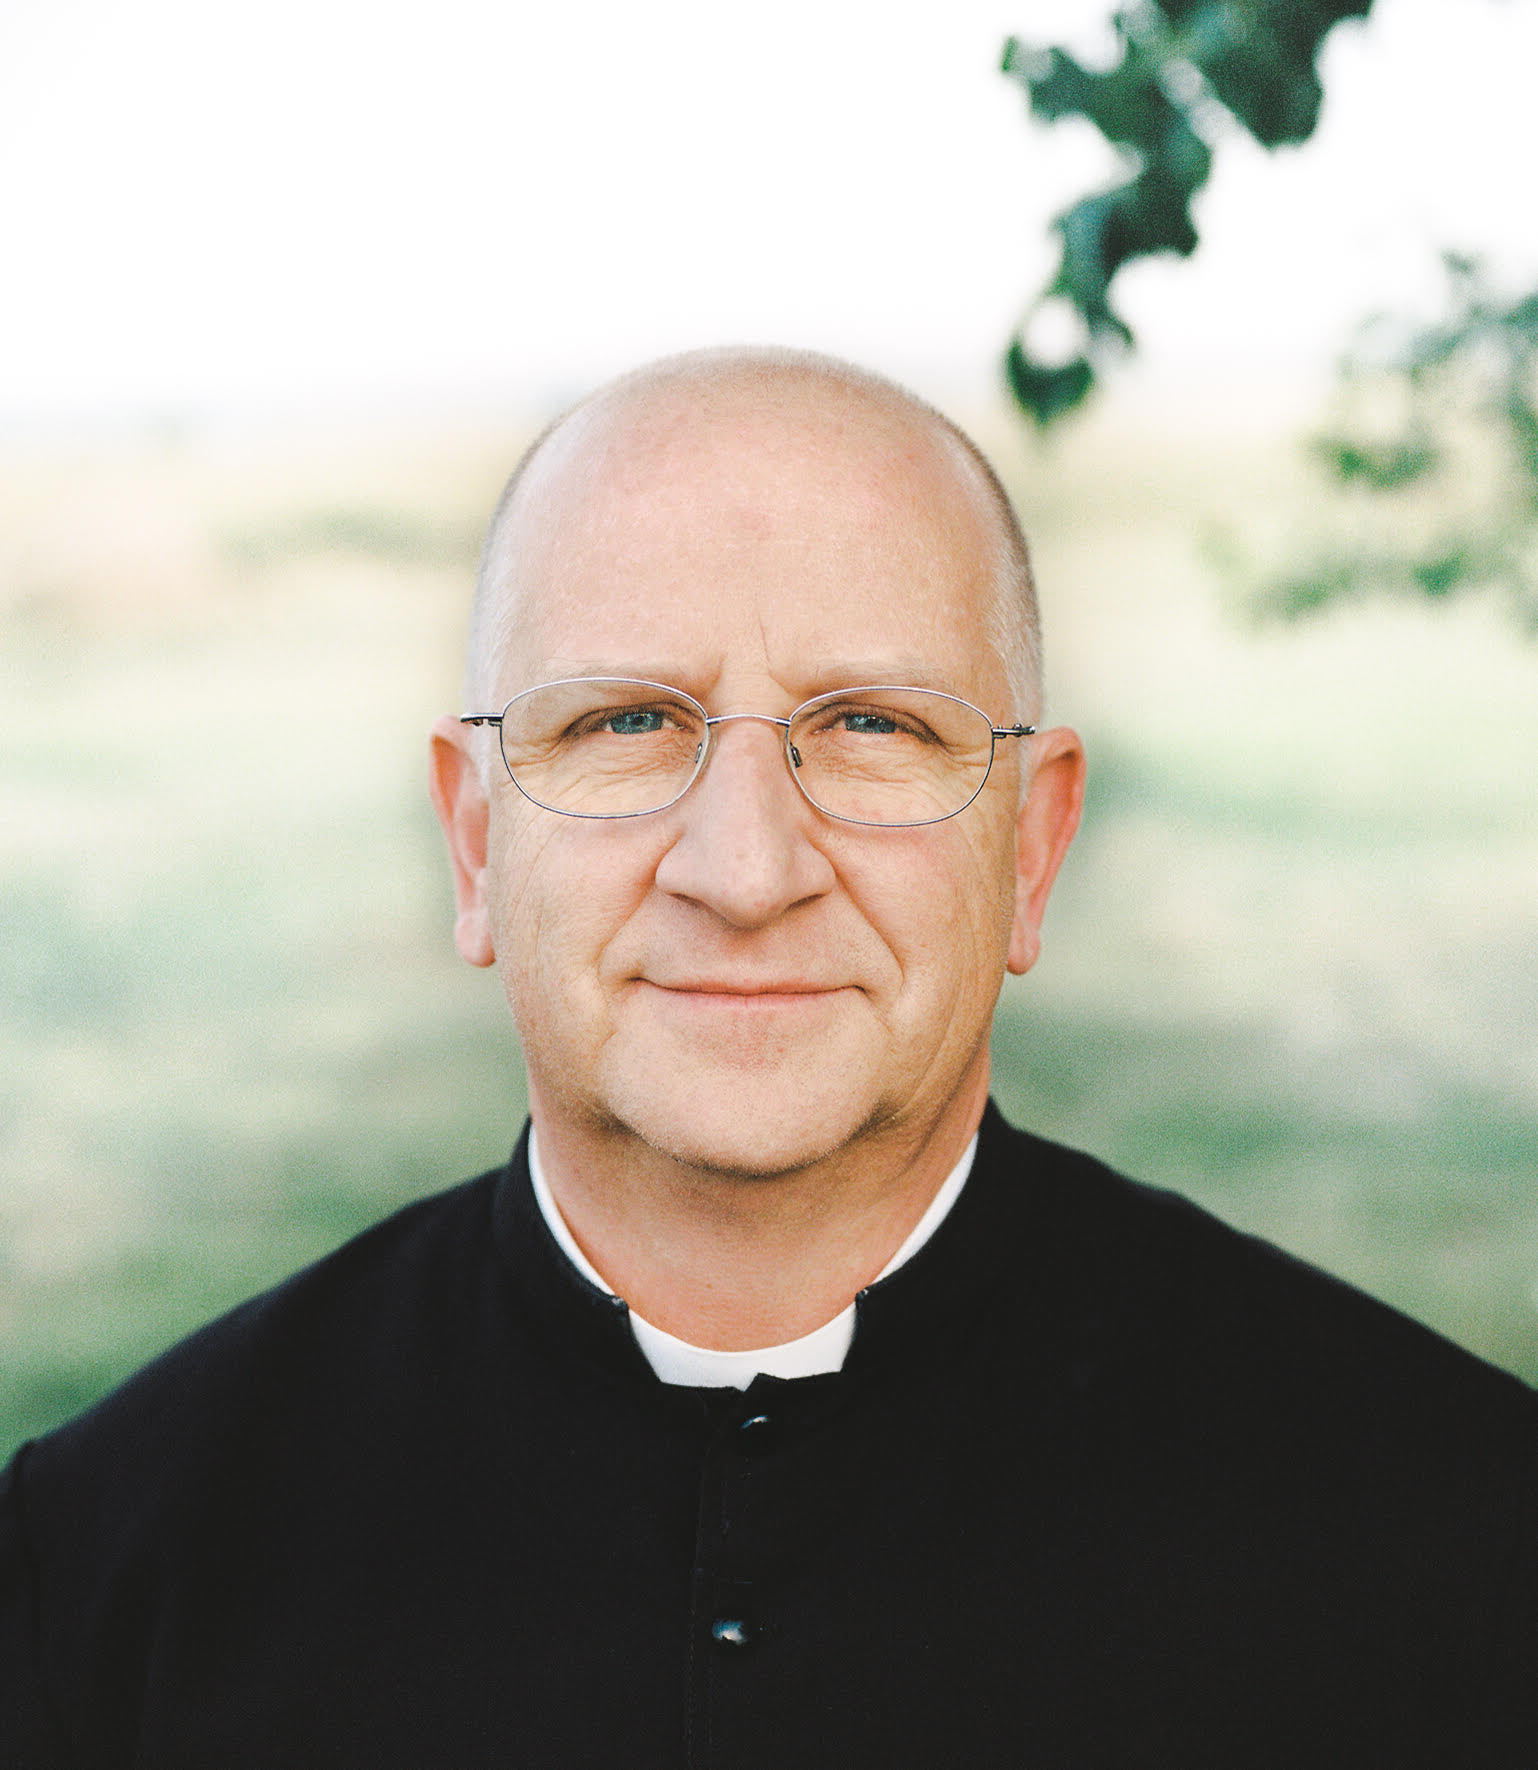 Fr. Chad Ripperger